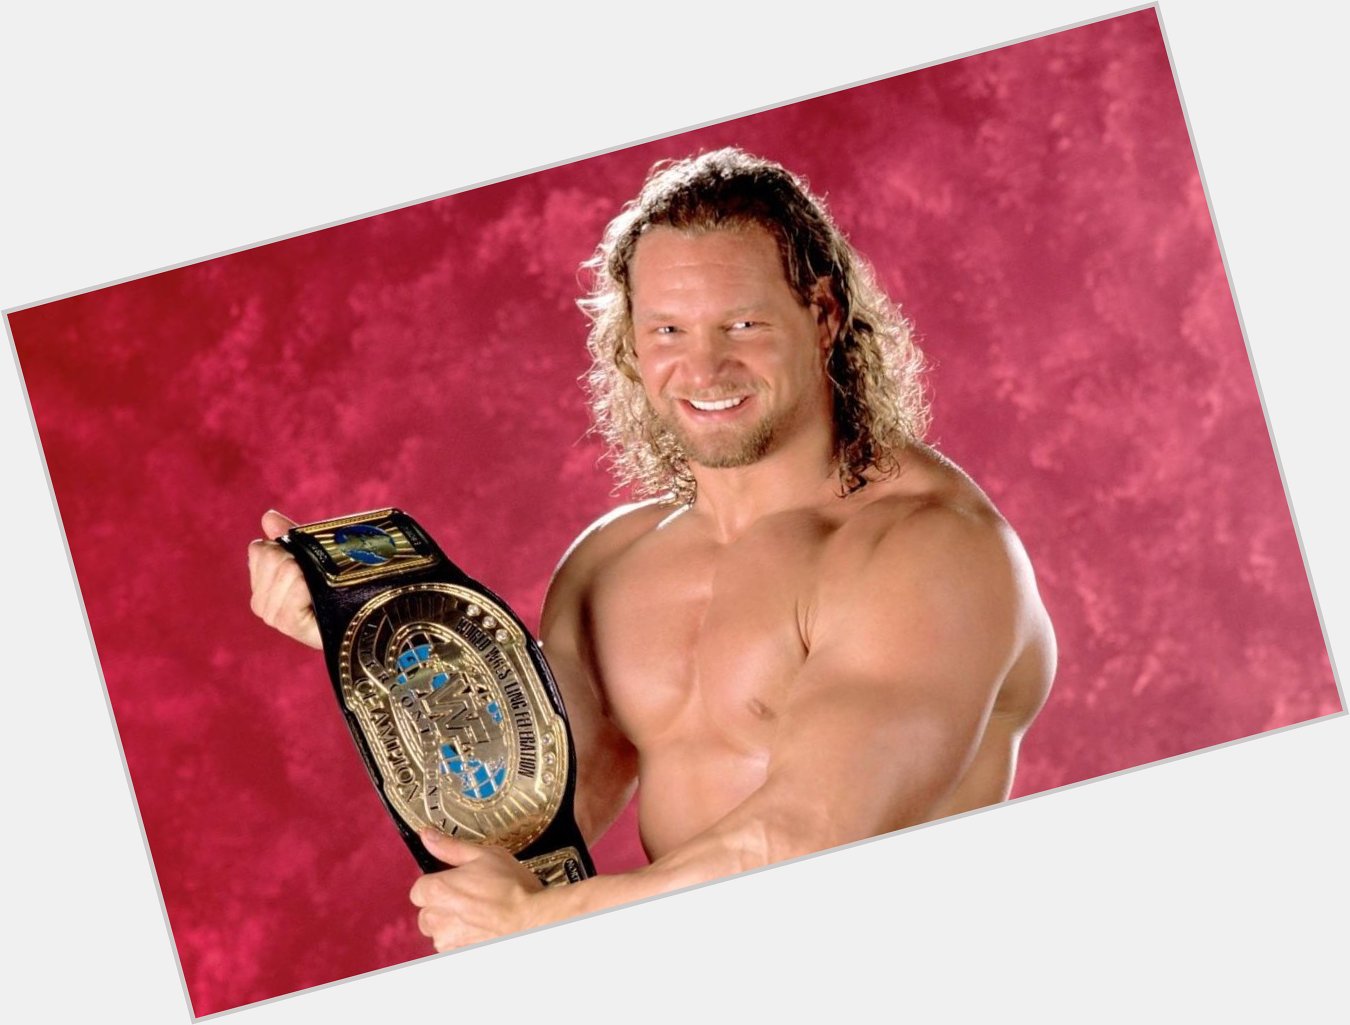 The Beermat wishes Val Venis a happy birthday

Have a good one  